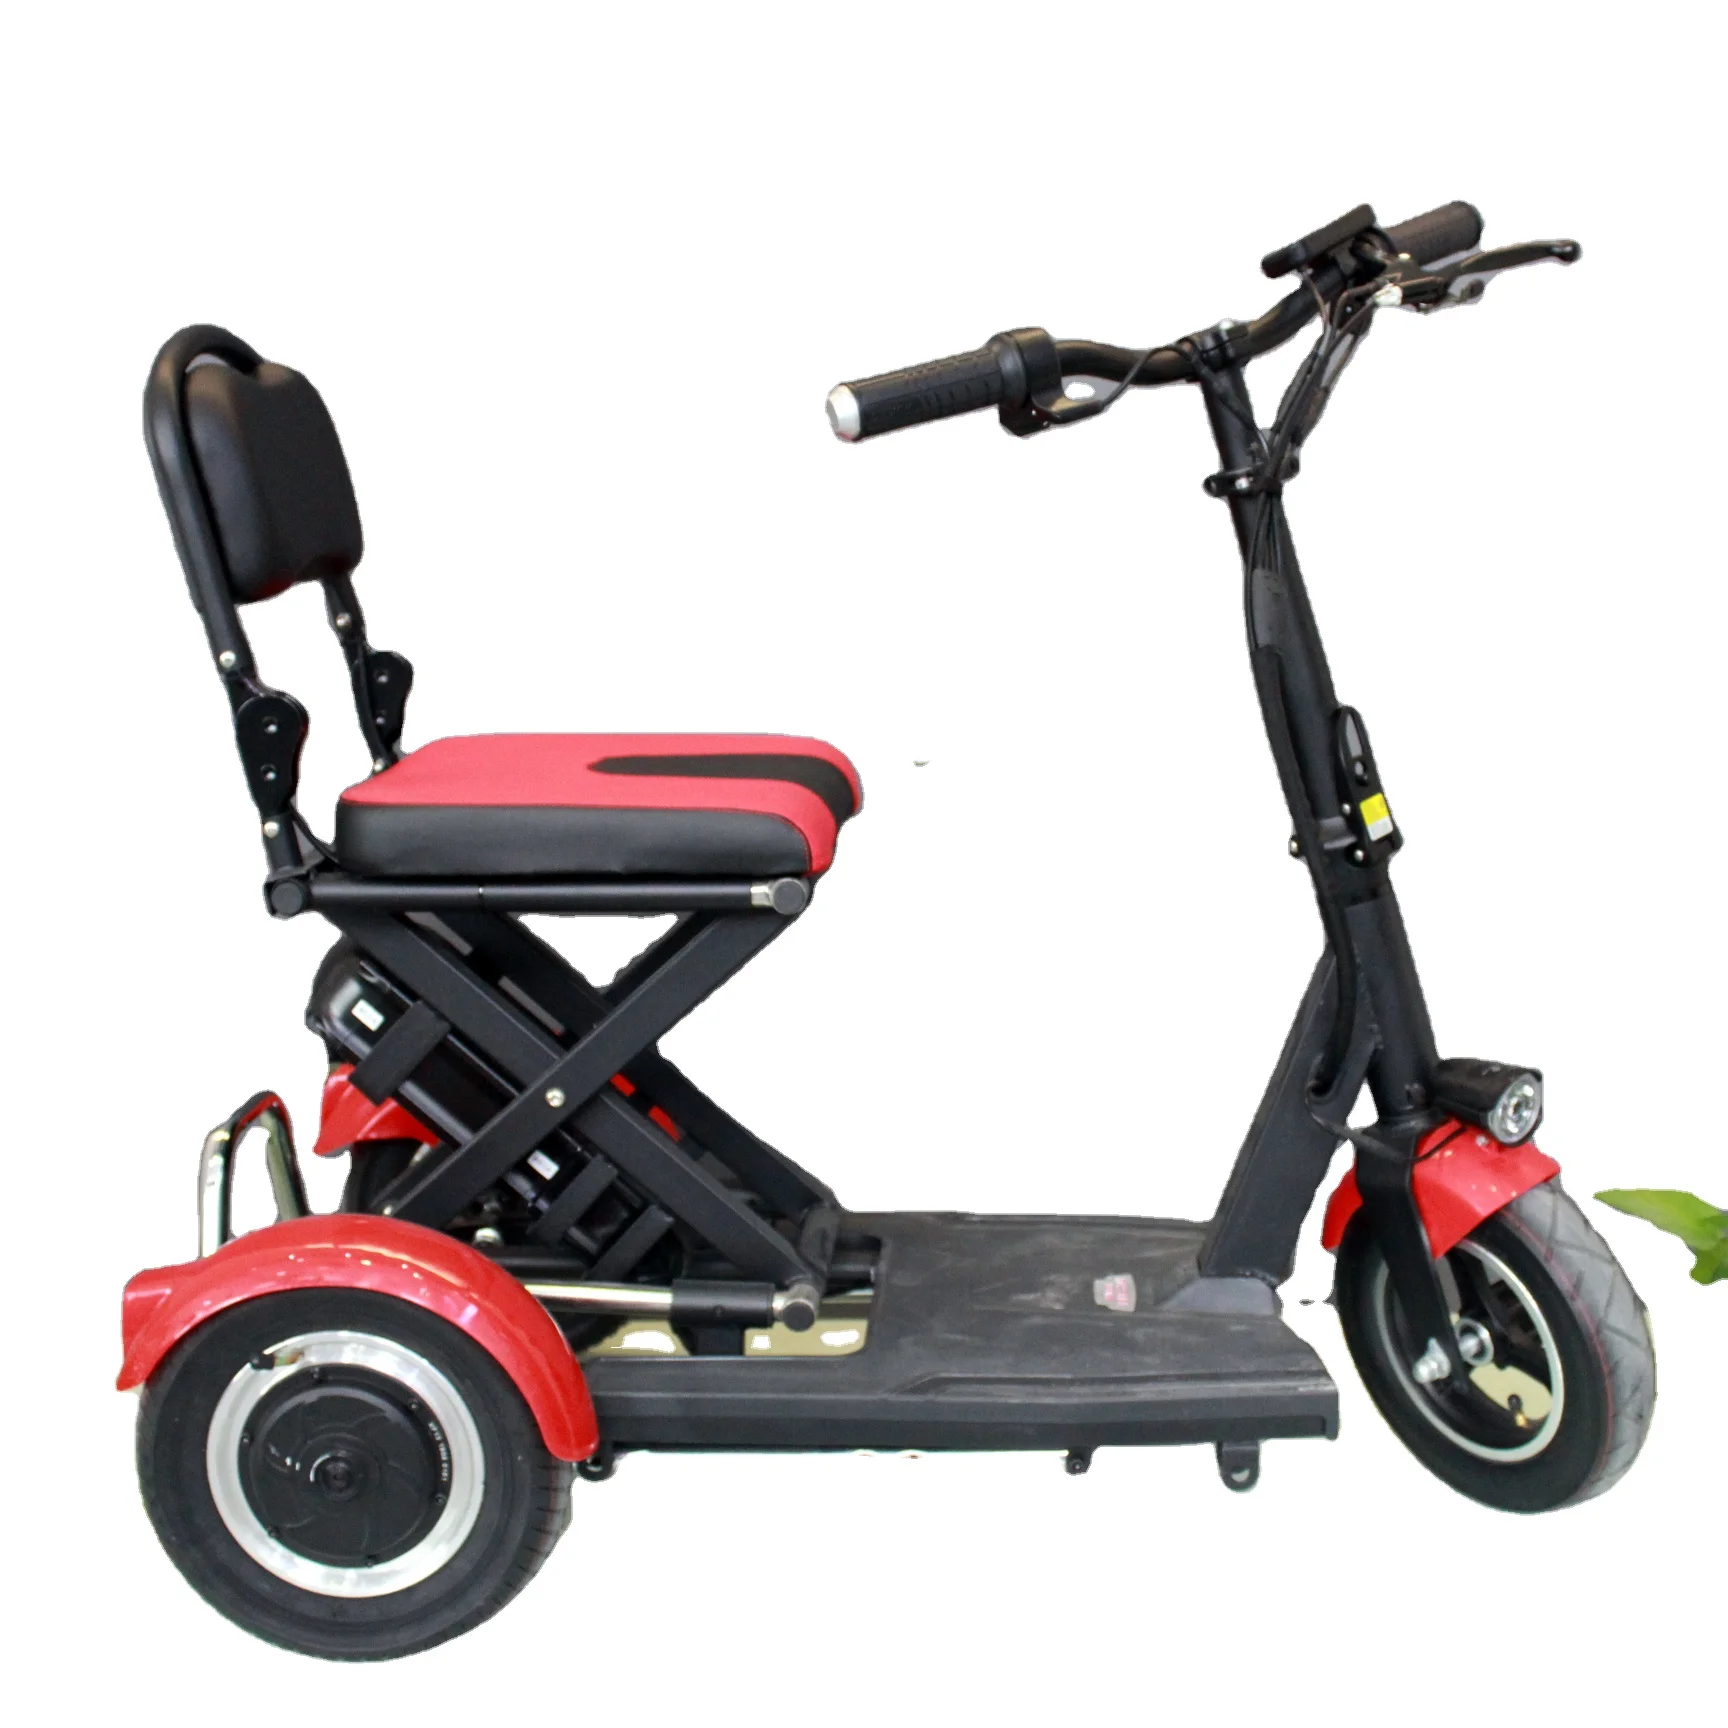 Electric Scooter Folding Type For Elderly And Disabled Handicapped Scooters 36v/48v 10Ah Lithium Battery Motor Scooter custom samebike jg20 smart folding electric moped bike 350w motor 10ah battery 32km h max speed 20 inch tire white